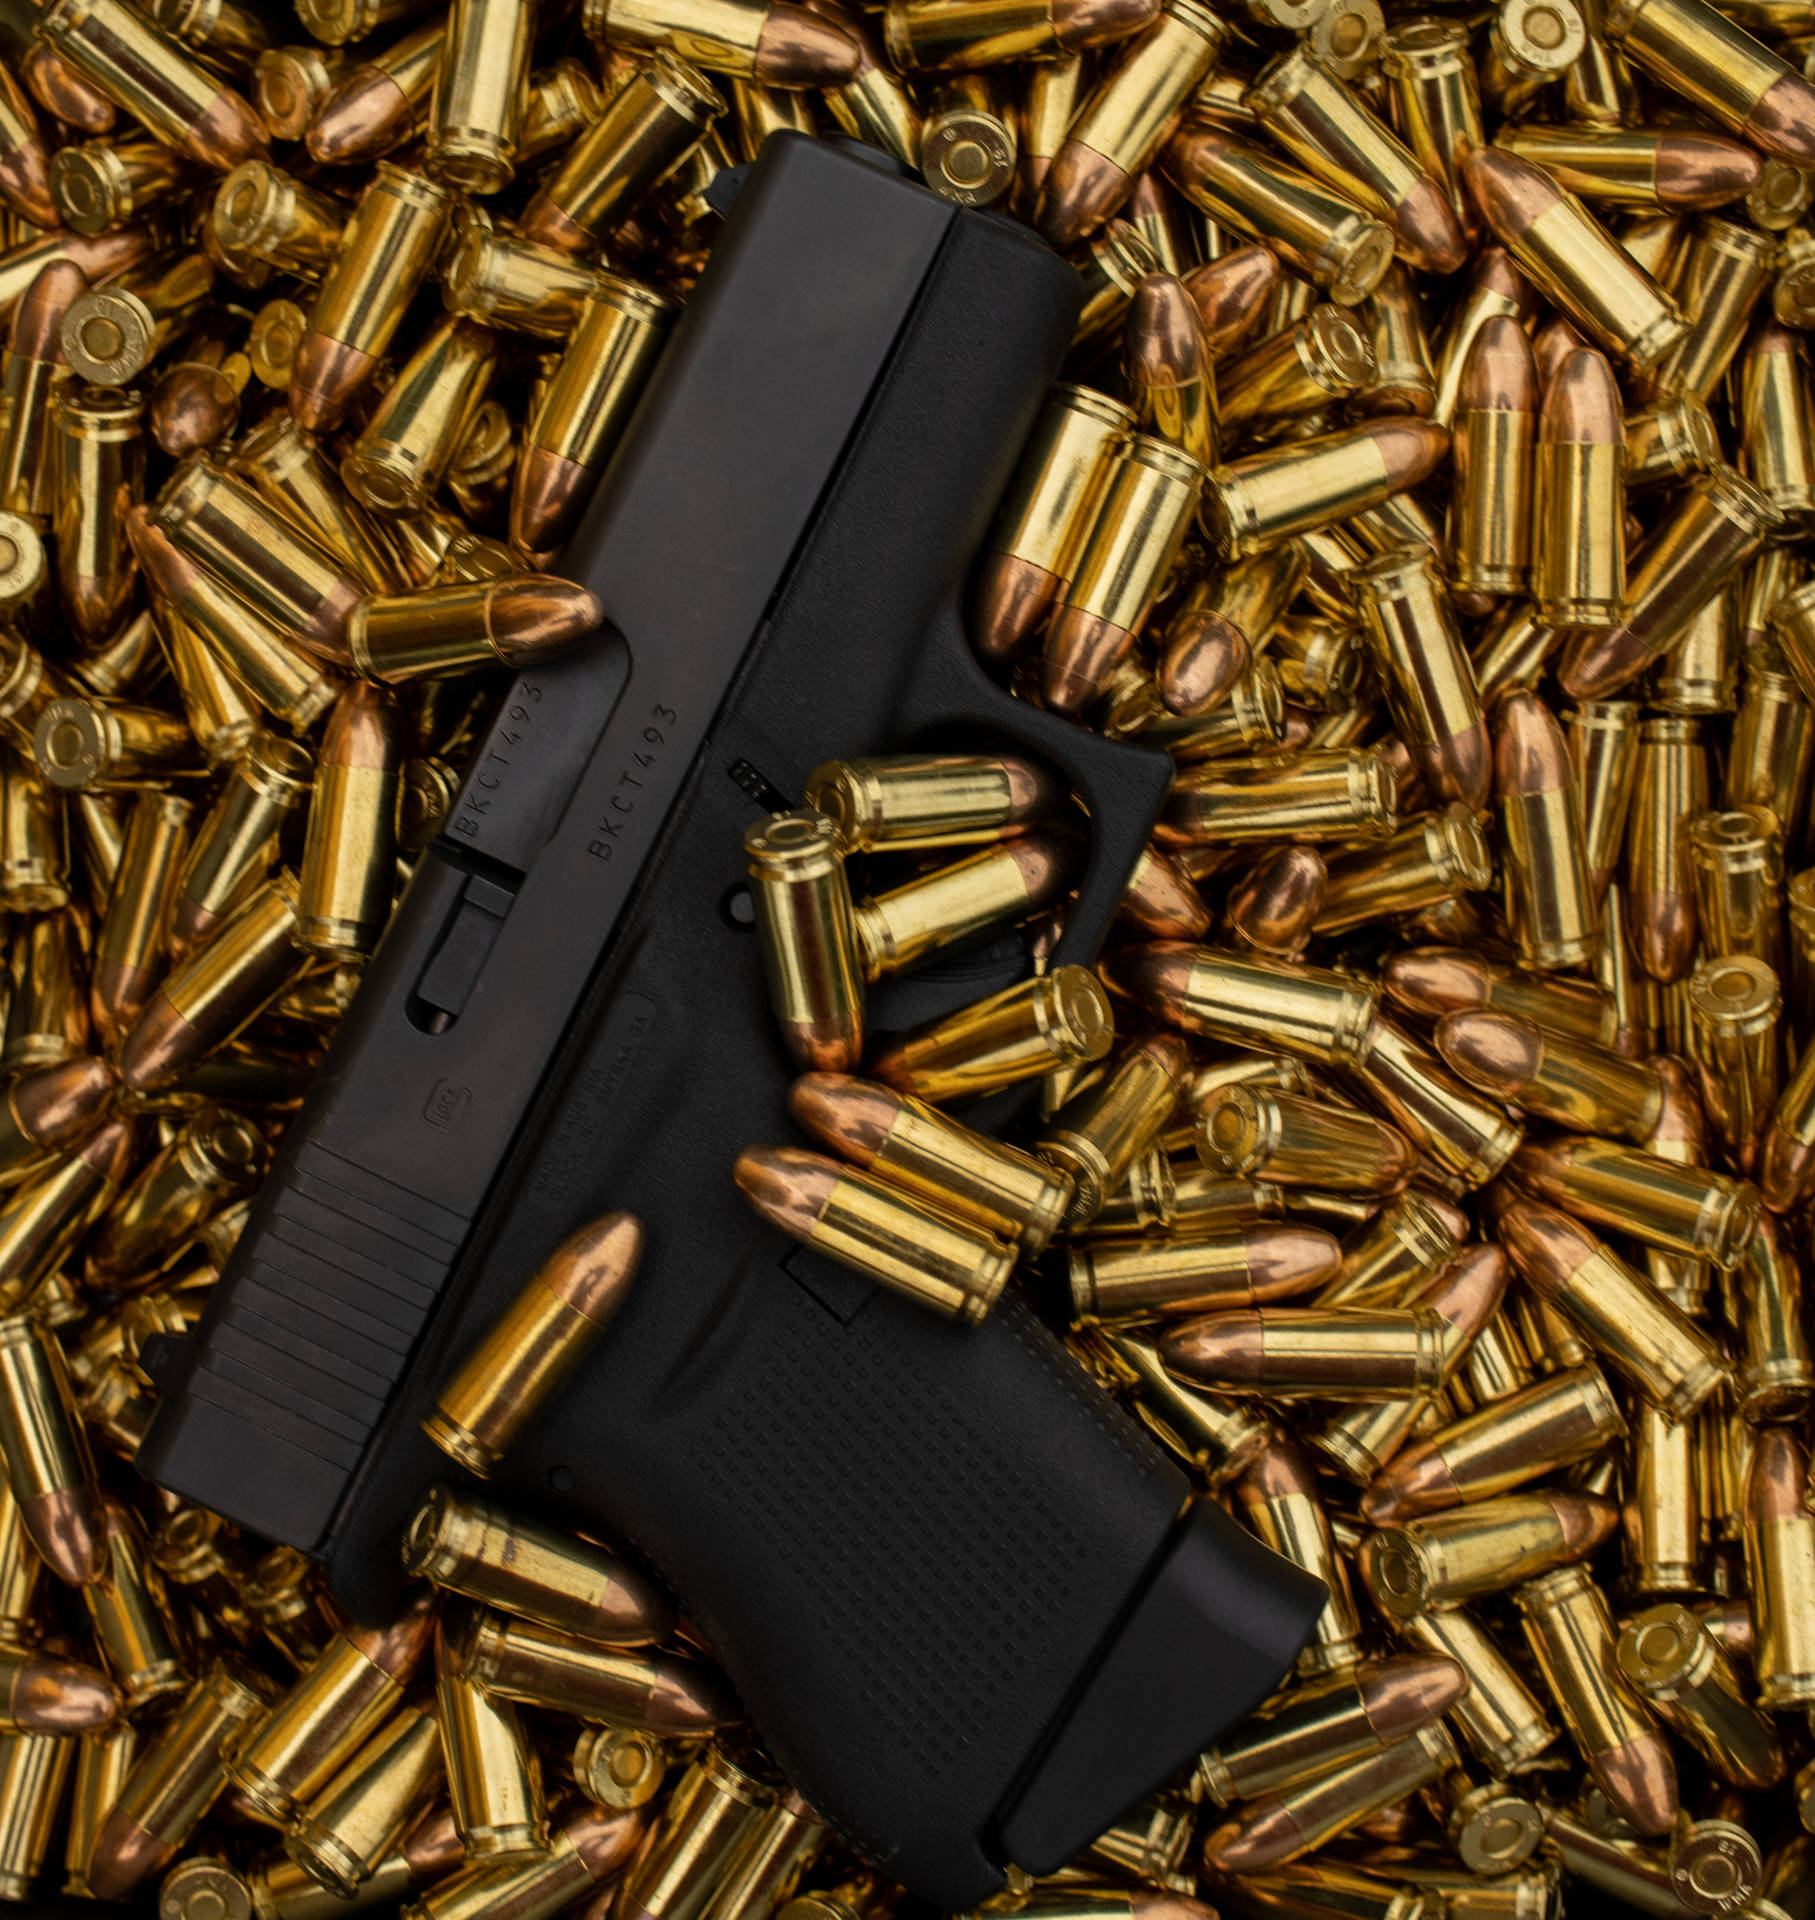 Glock On Top Of Bullets Background